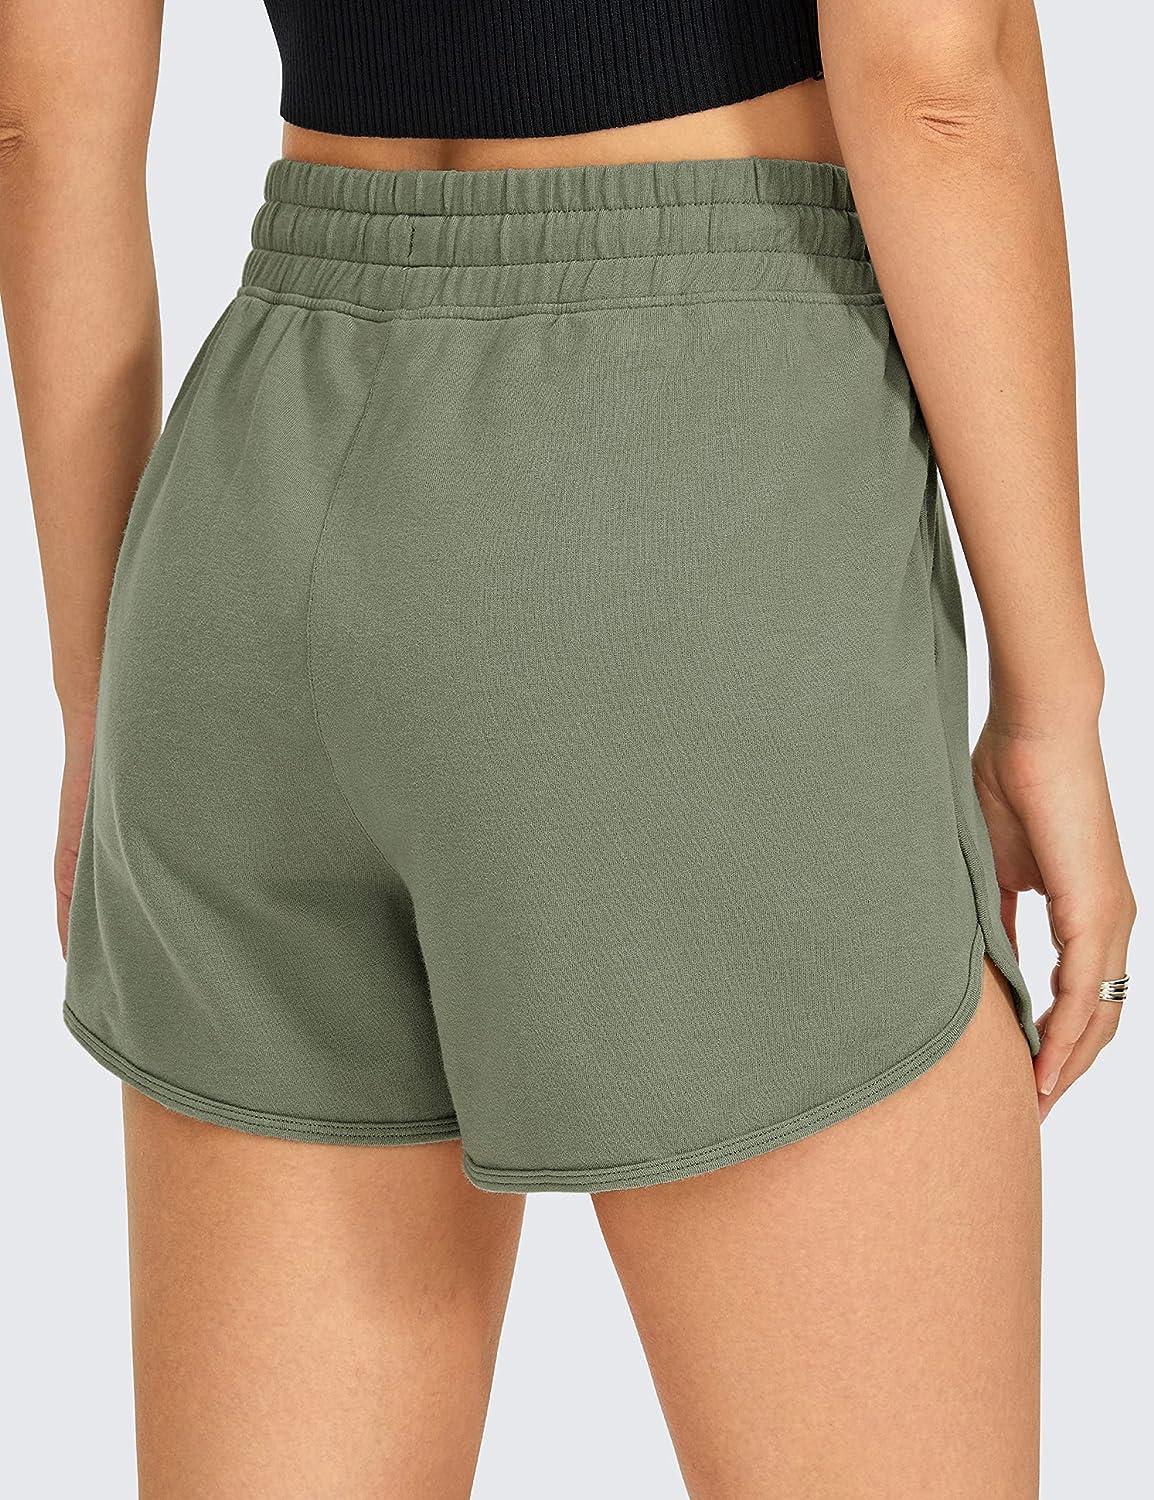 CRZ YOGA Women's Quick-Dry Loose Running Shorts with Pocket-2.5 Inseam  -Size:12